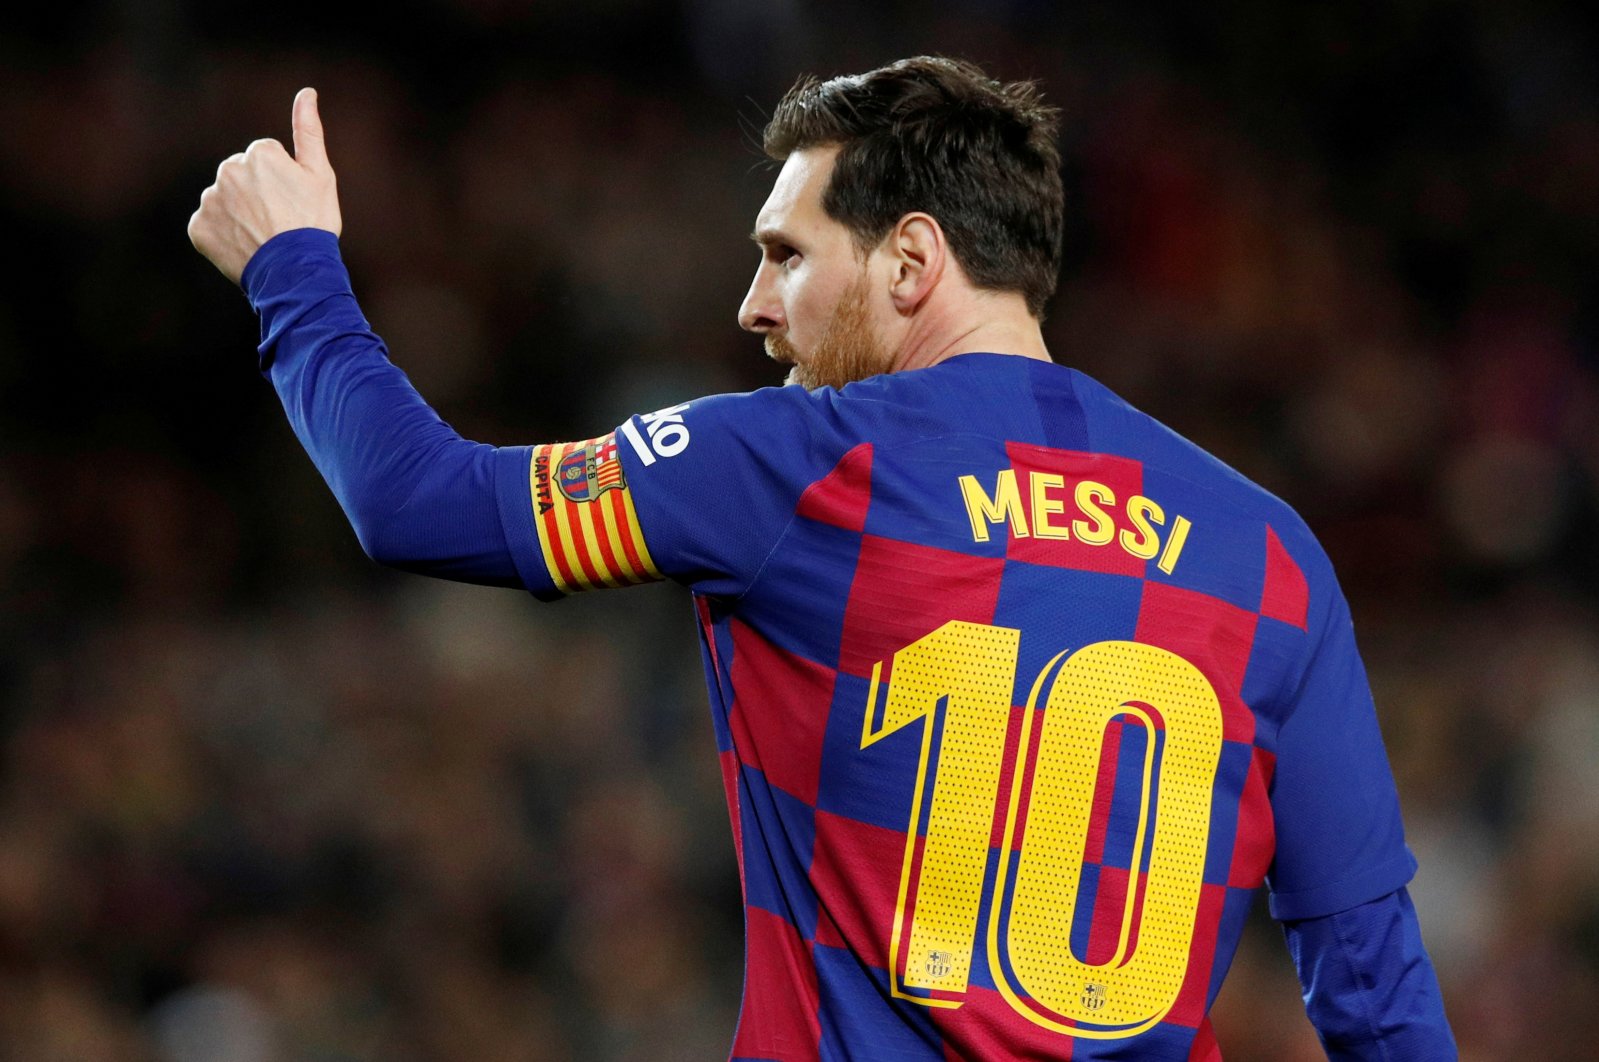 Barcelona's Lionel Messi celebrates scoring their first goal against Real Sociedad (Reuters Photo)